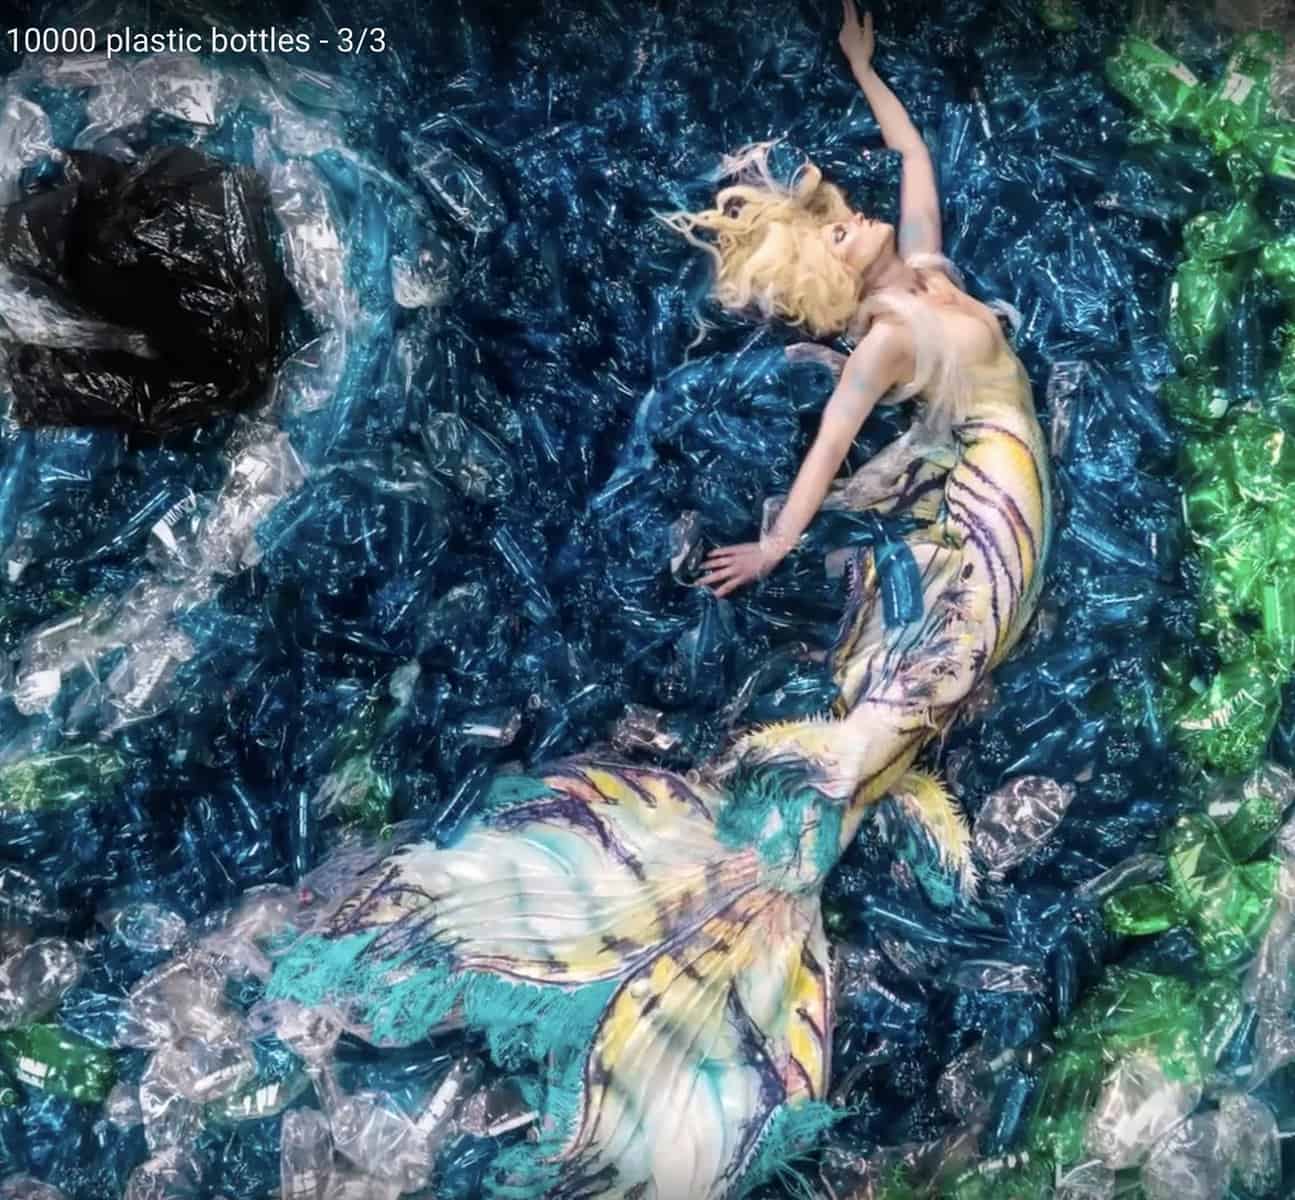 10,000 Plastic Bottles and a Mermaid